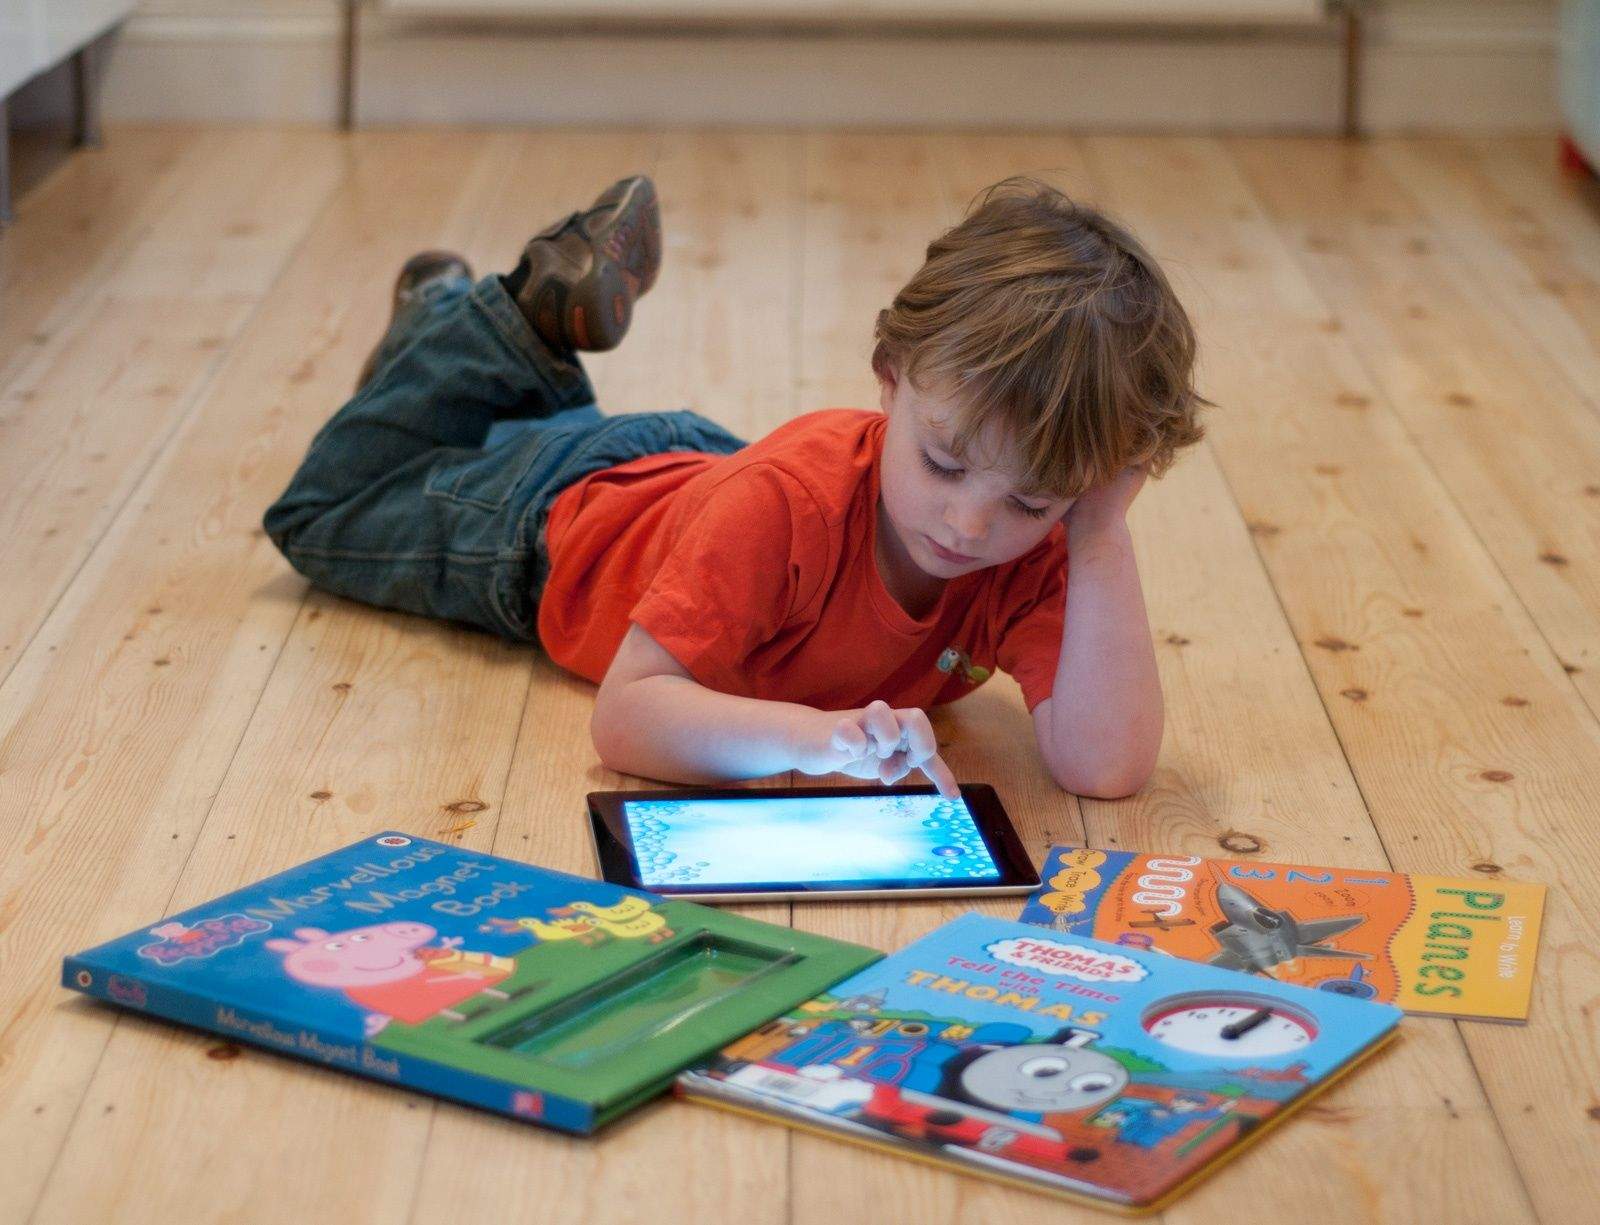 iPad game may treat lazy eye condition in kids